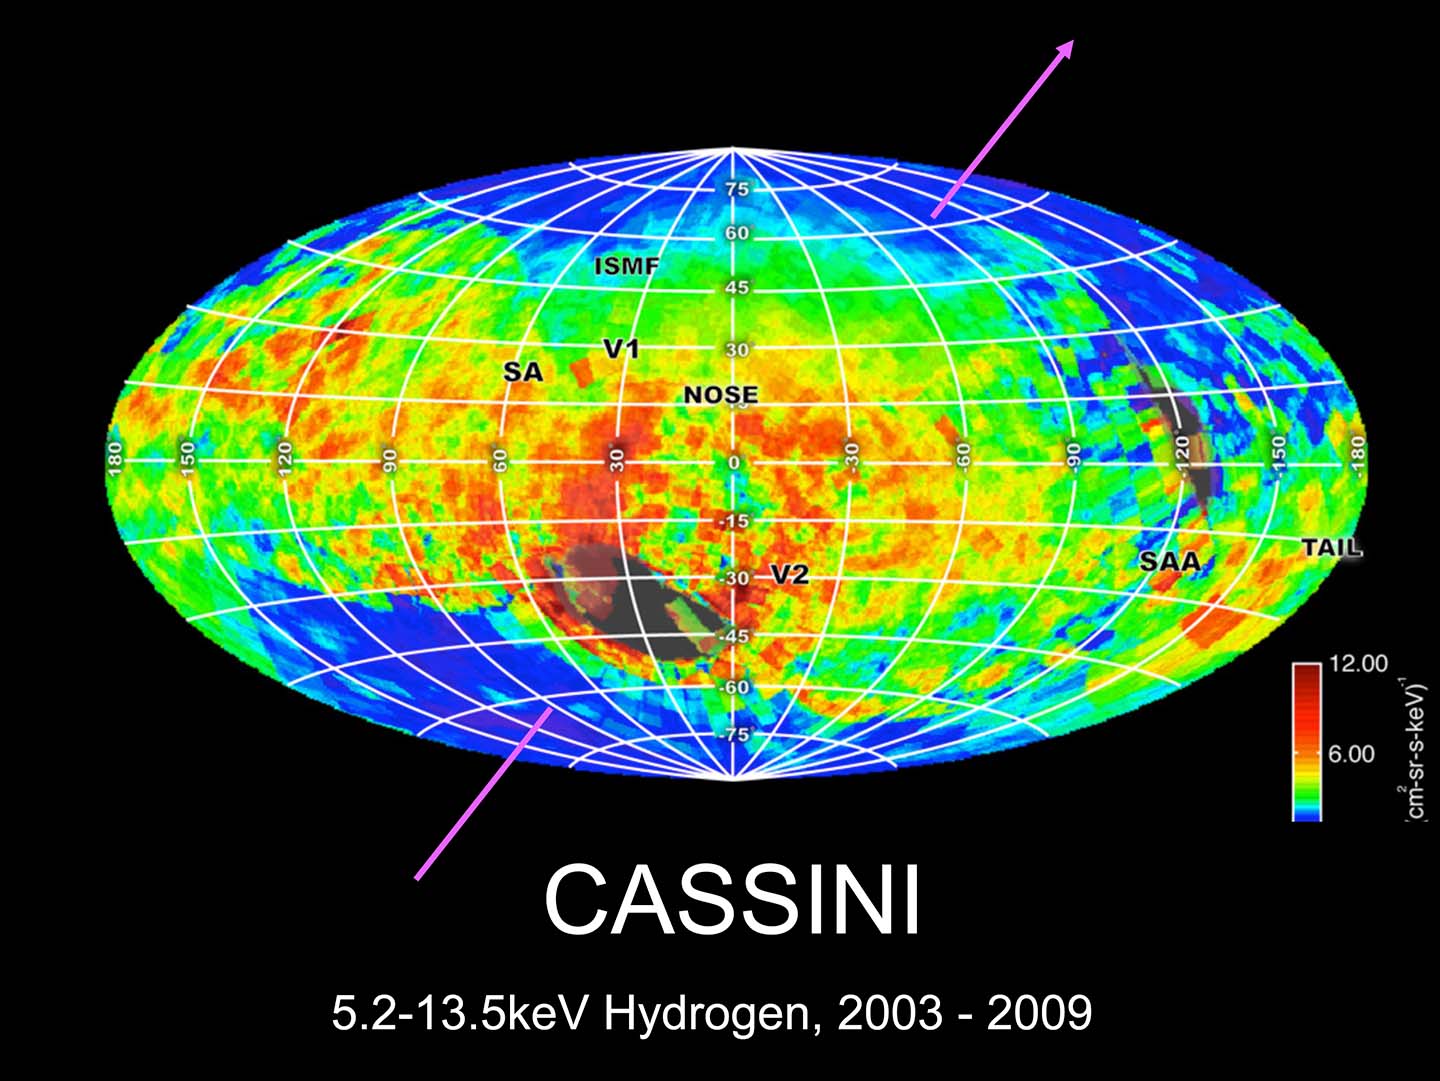 Full sky image of the energetic neutral atom emission from the sheath of hot particles formed in the region where the solar wind collides with the interstellar medium (the heliosheath). The data are shown in galactic coordinates. 